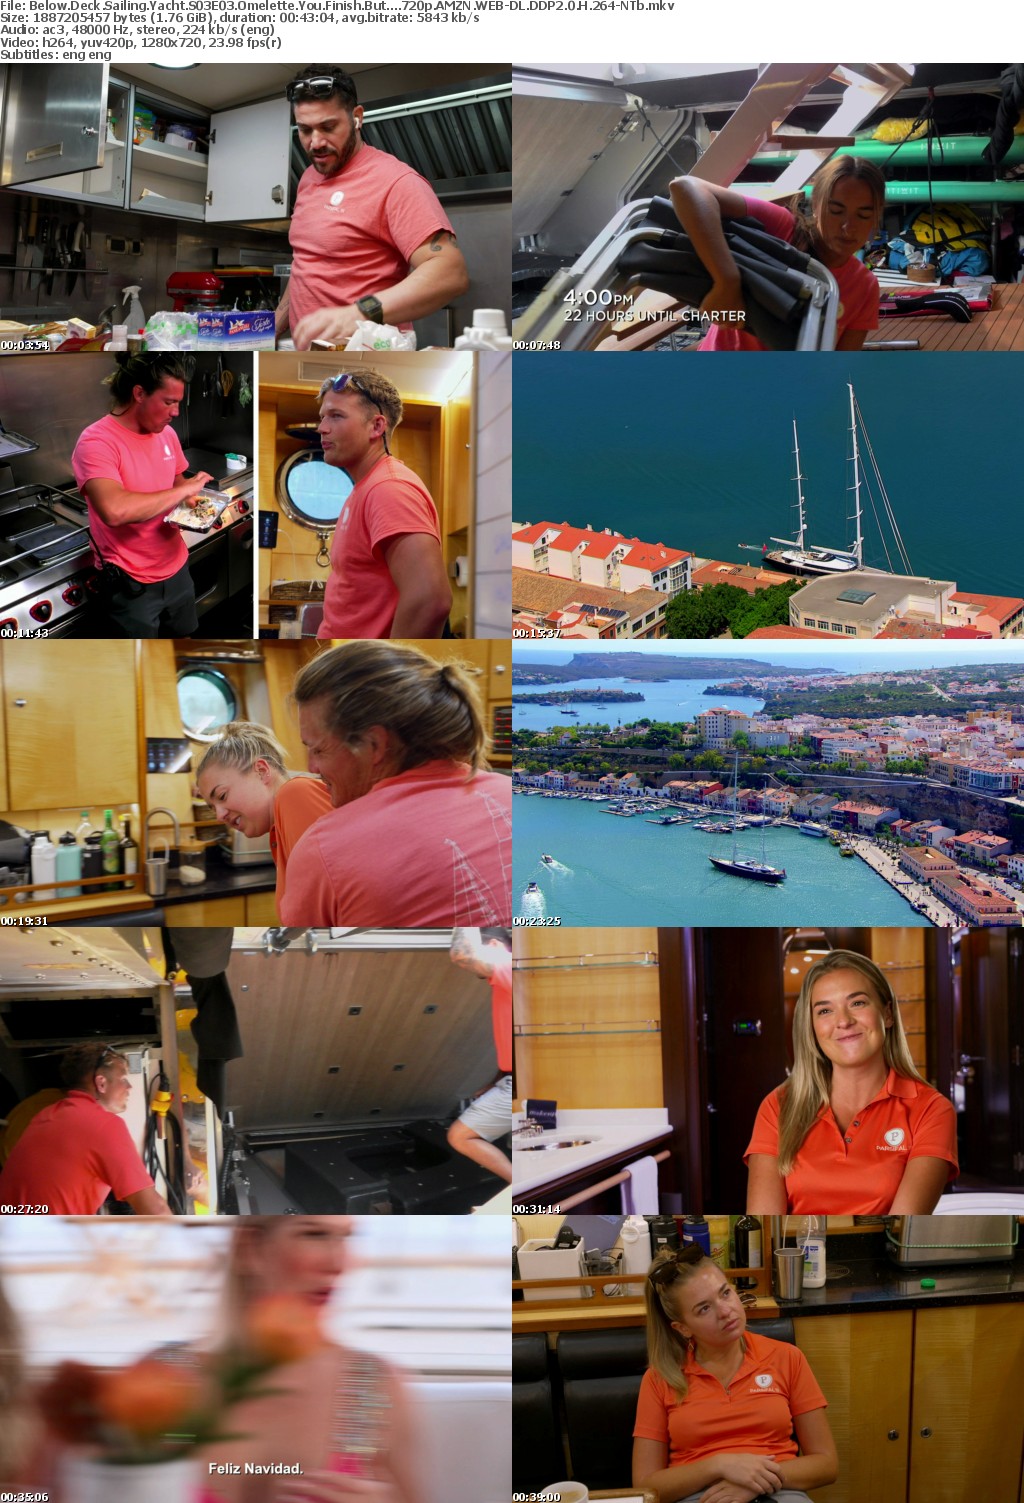 Below Deck Sailing Yacht S03E03 Omelette You Finish But 720p AMZN WEBRip DDP2 0 x264-NTb